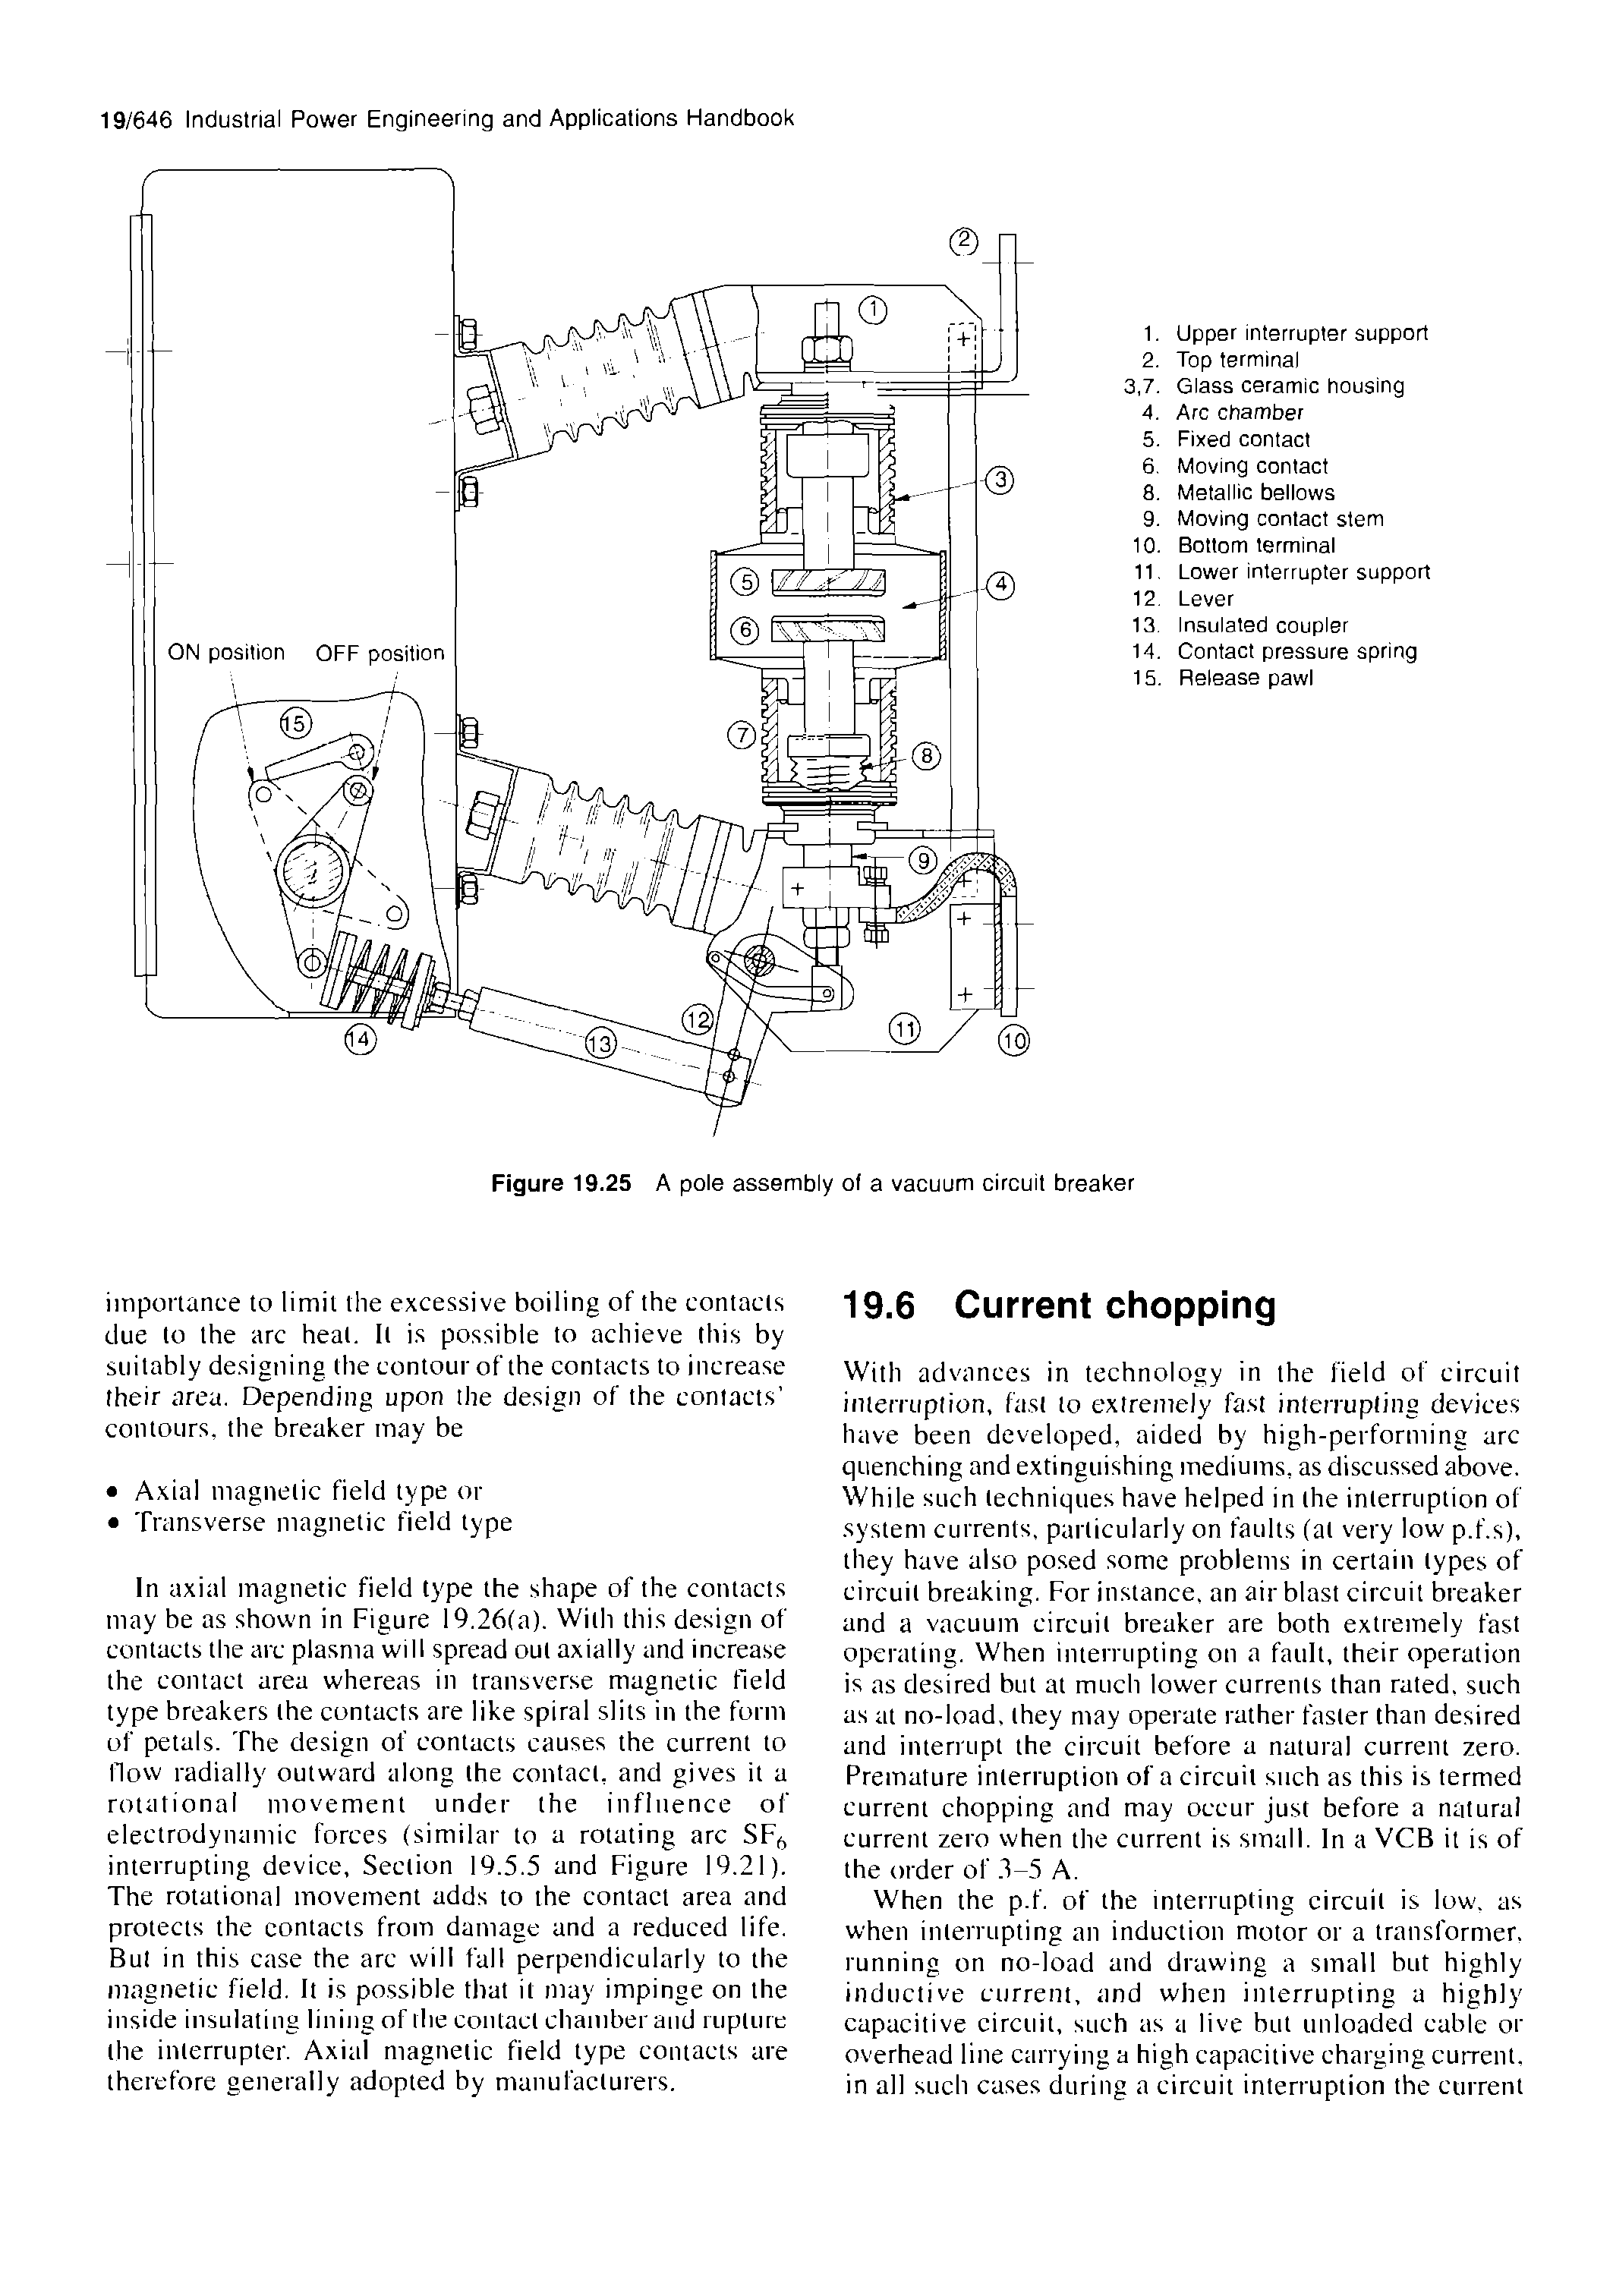 Figure 19.25 A pole assembly of a vacuum circuit breaker...